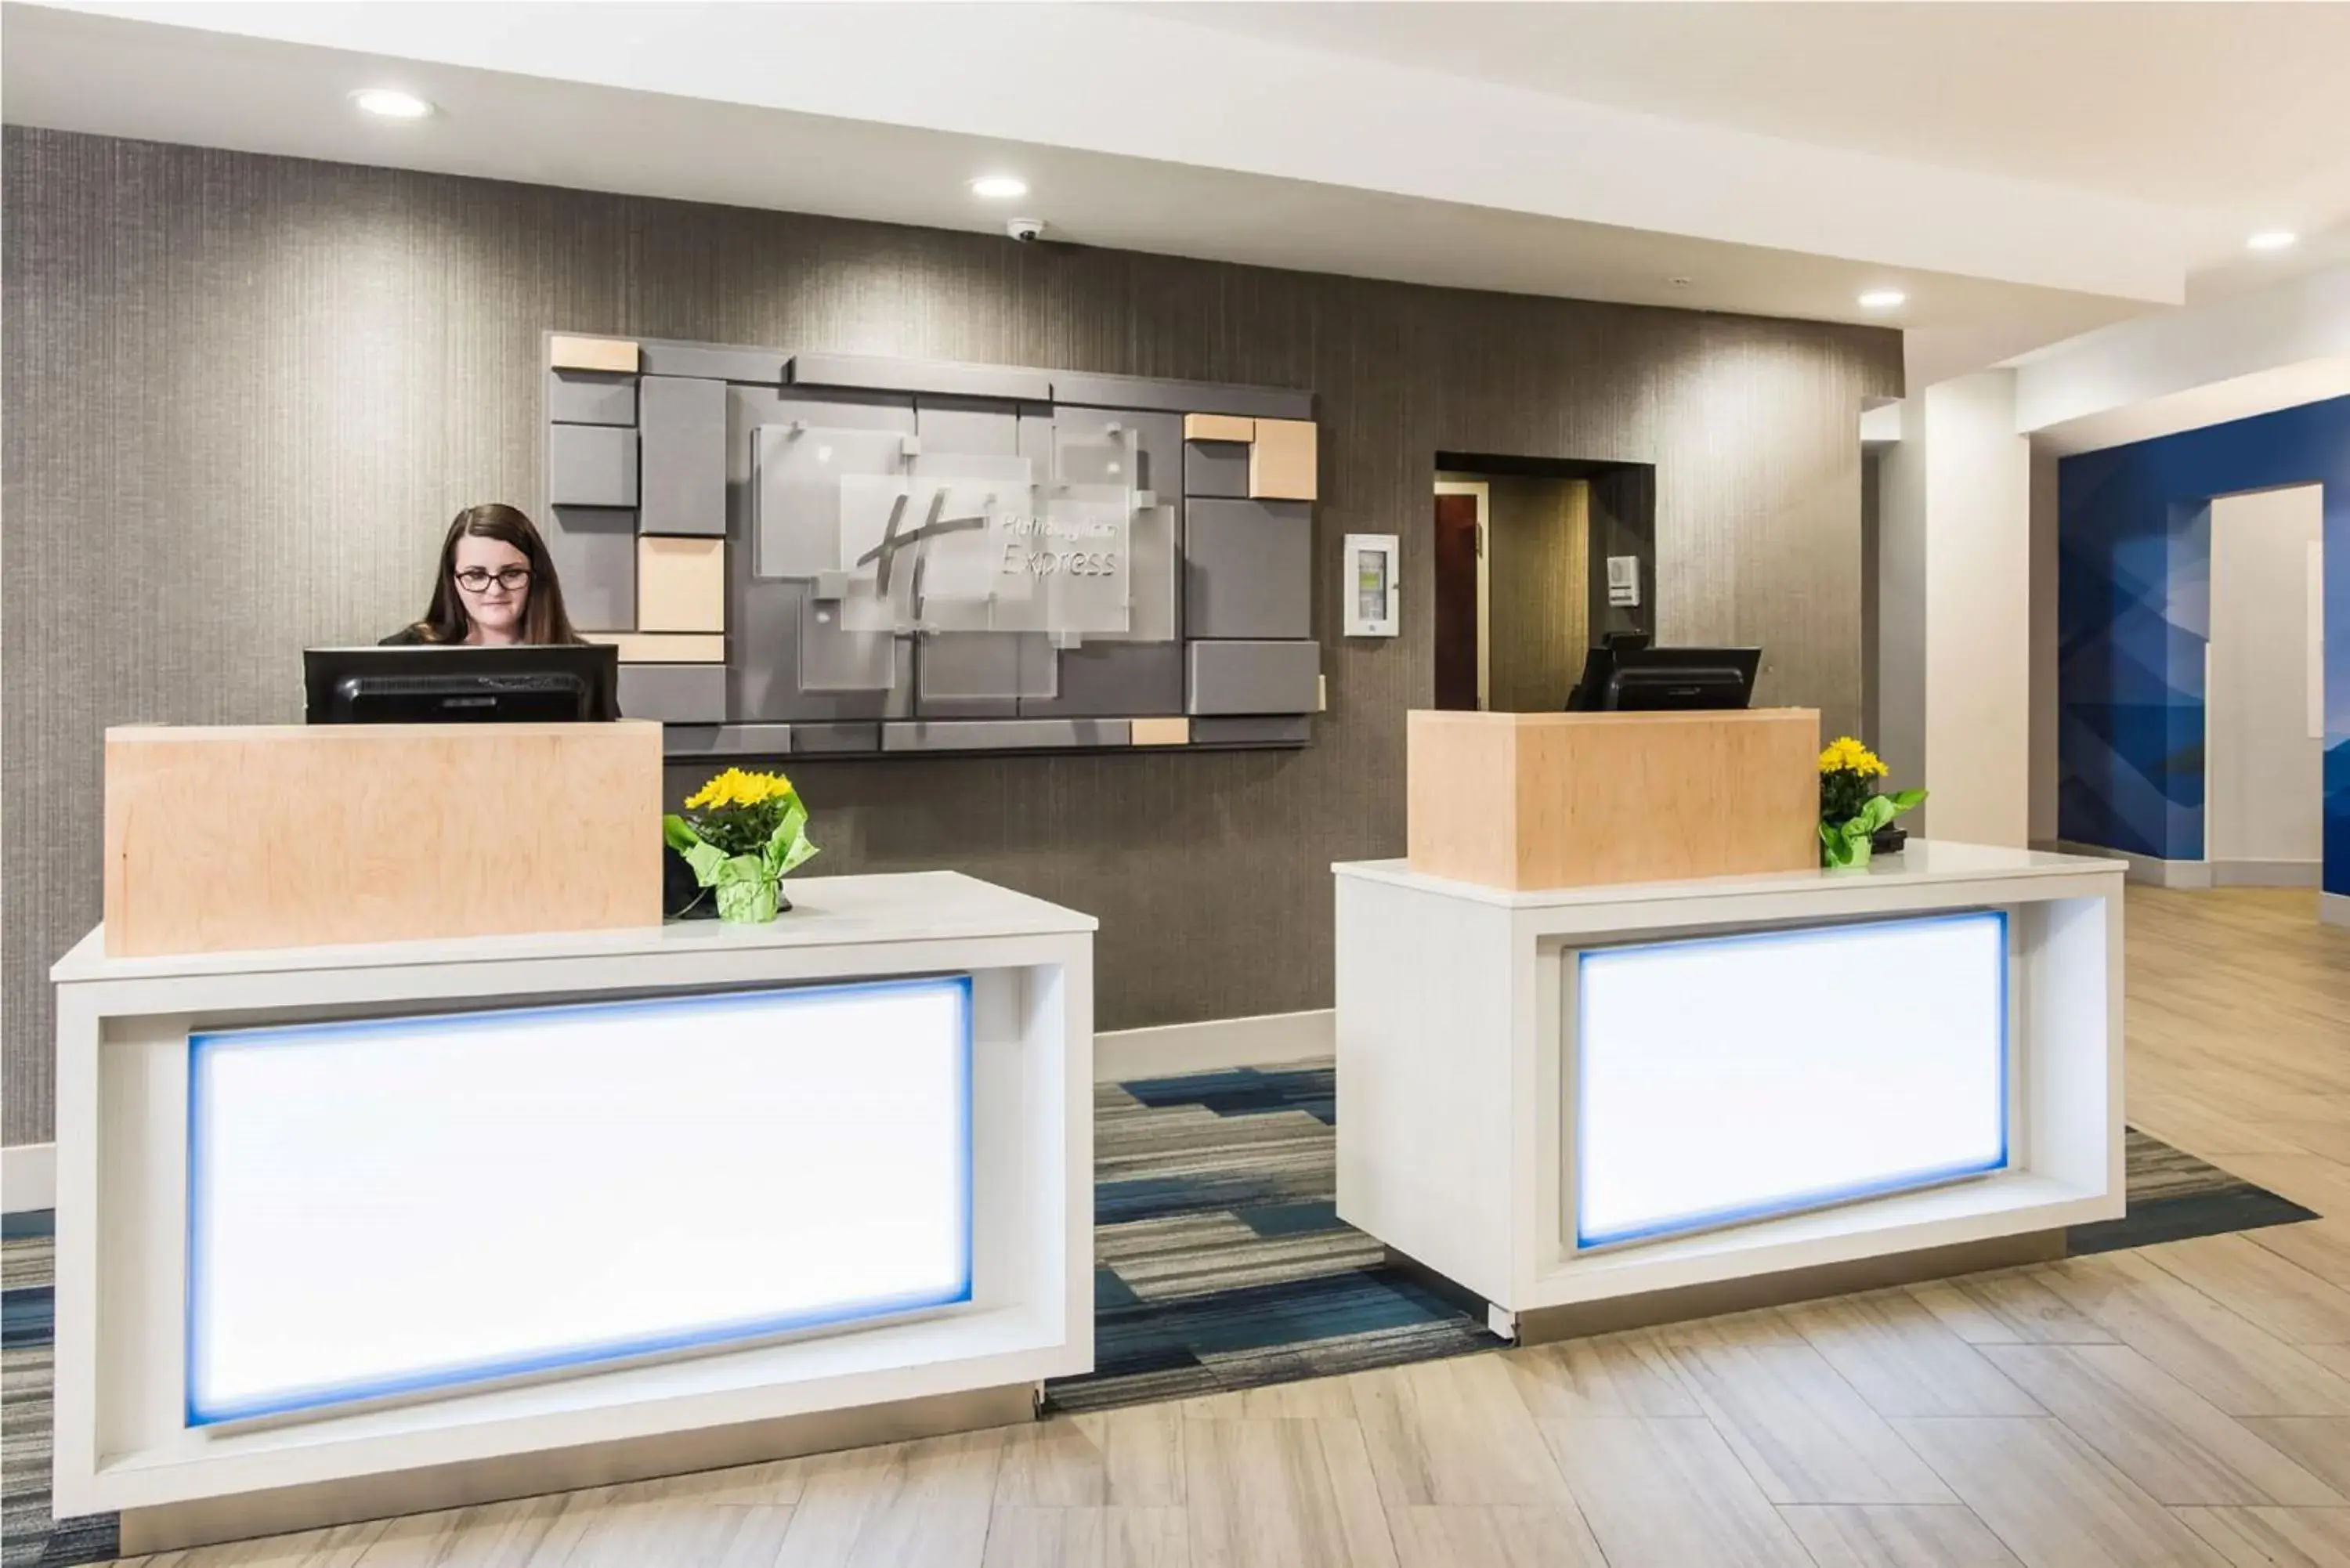 Property building, Lobby/Reception in Holiday Inn Express Albany Downtown